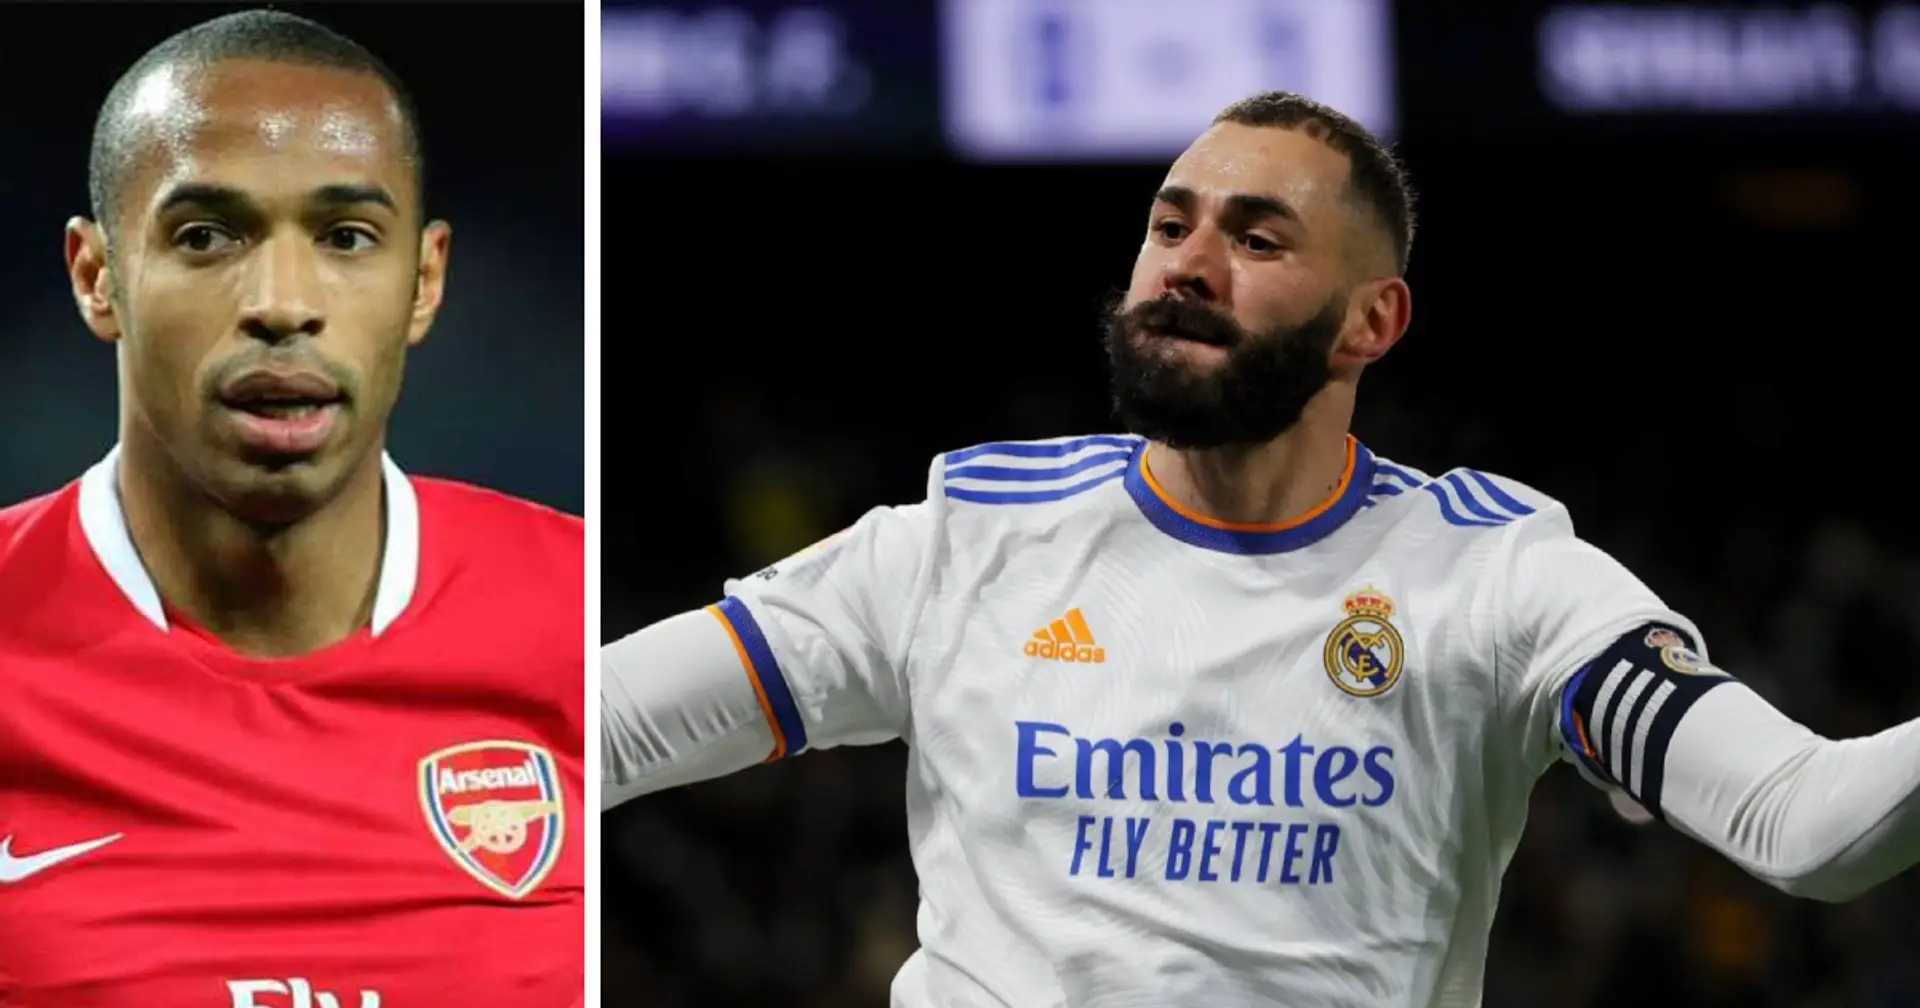 Benzema overtakes Henry as top French goalscorer in club football